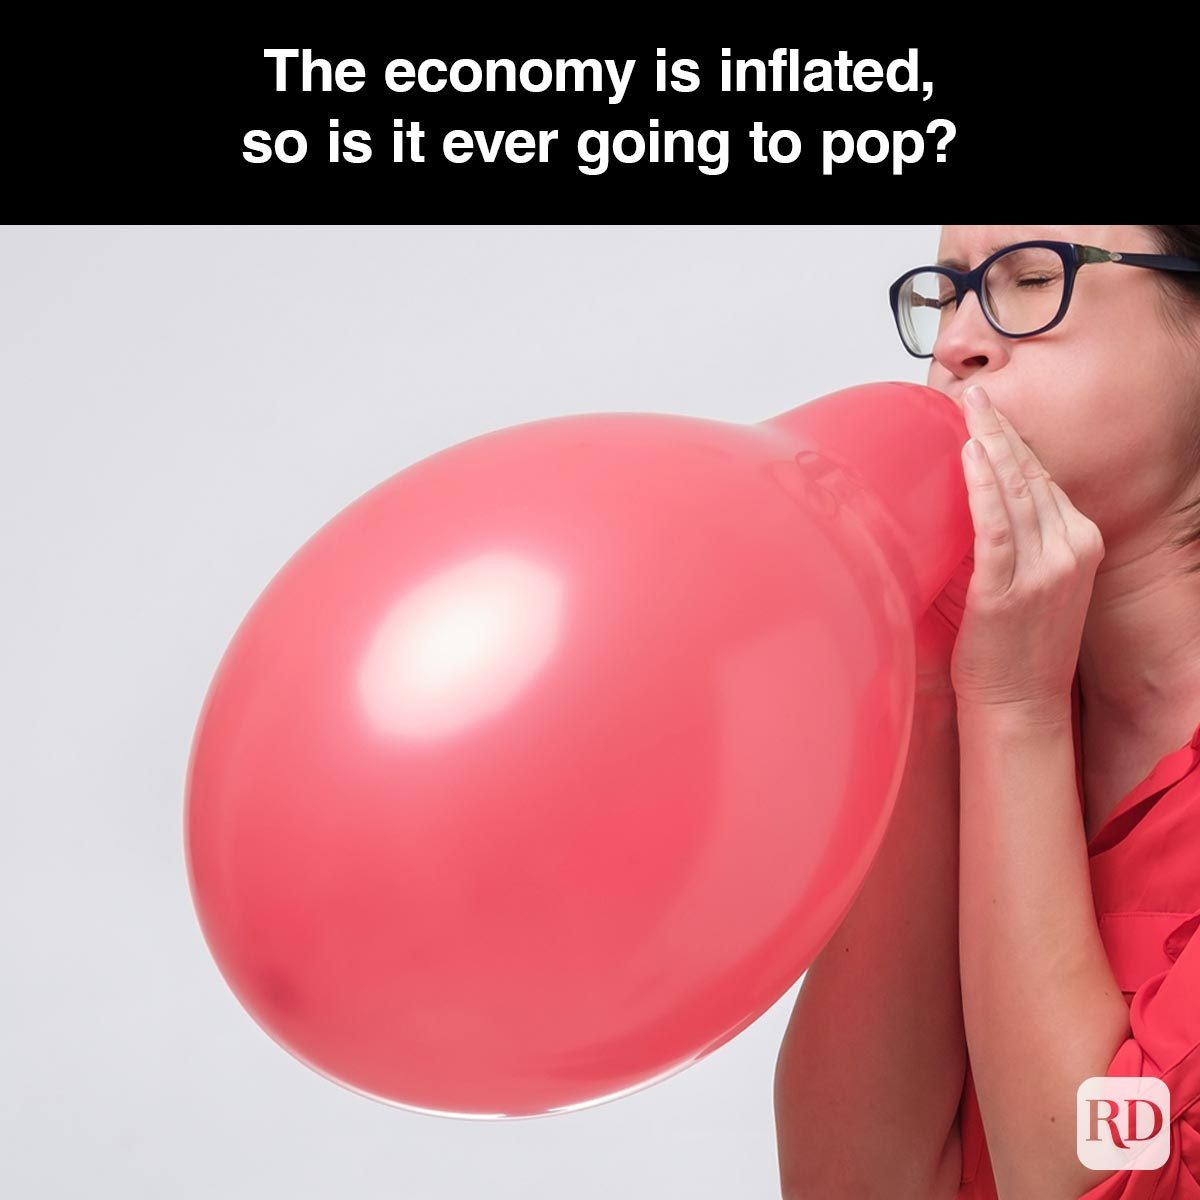 32 Hilarious Inflation Memes That'll Make You Laugh Through the Pain